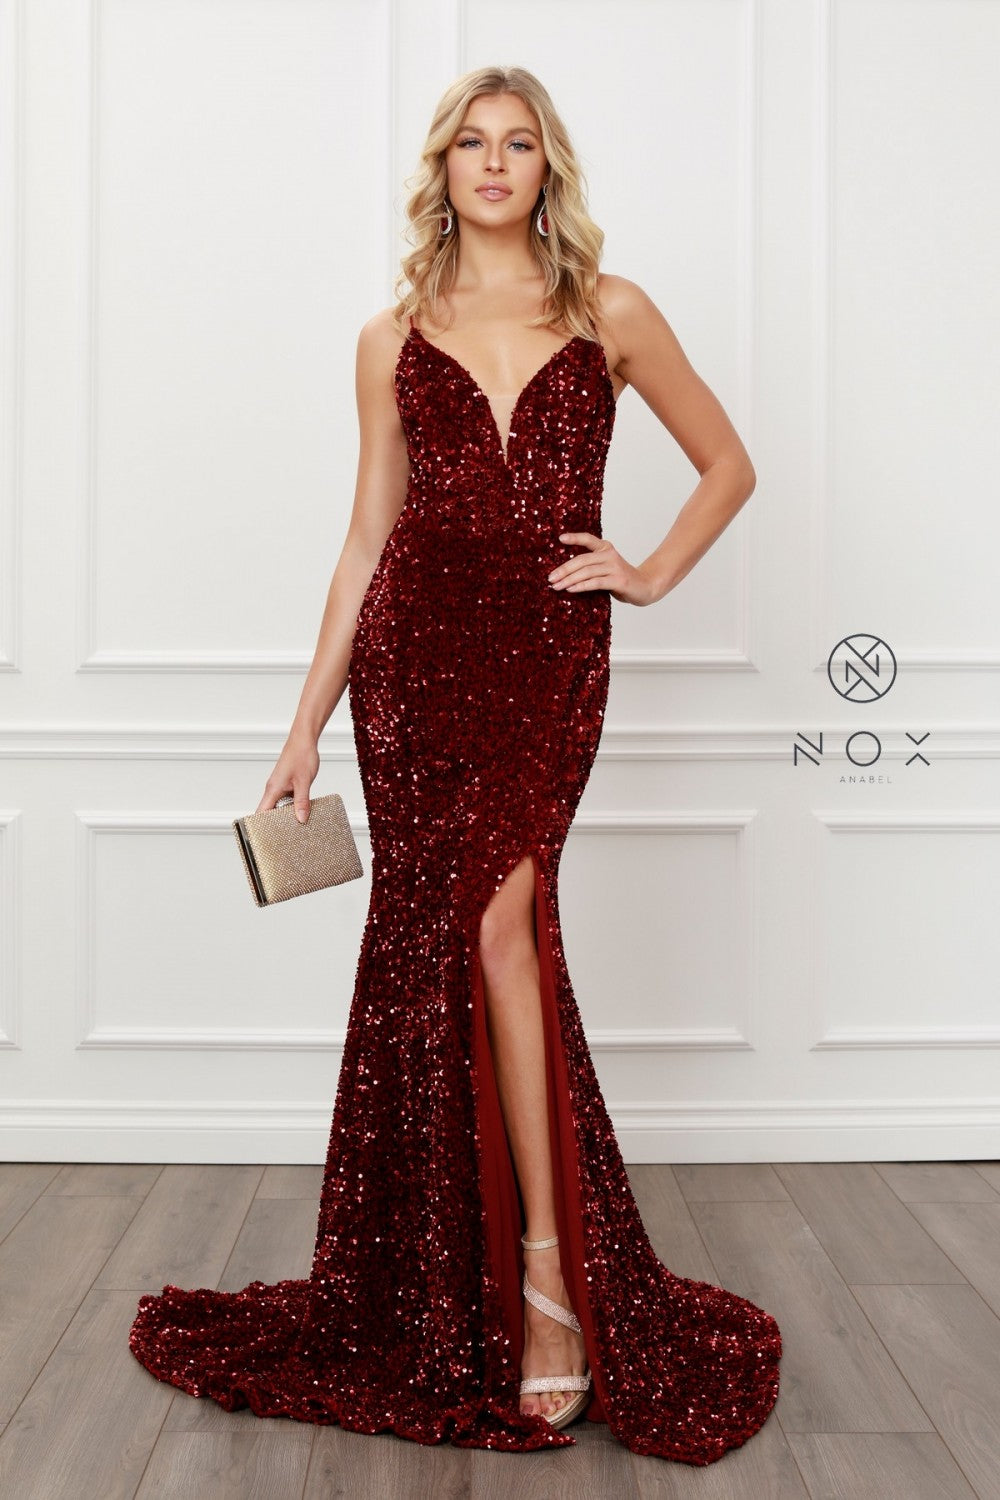 N R433 - Full Sequin Fit & Flare Prom Gown with V-Neck Open Corset Back & Leg Slit Prom Dress Nox 2 BURGUNDY 